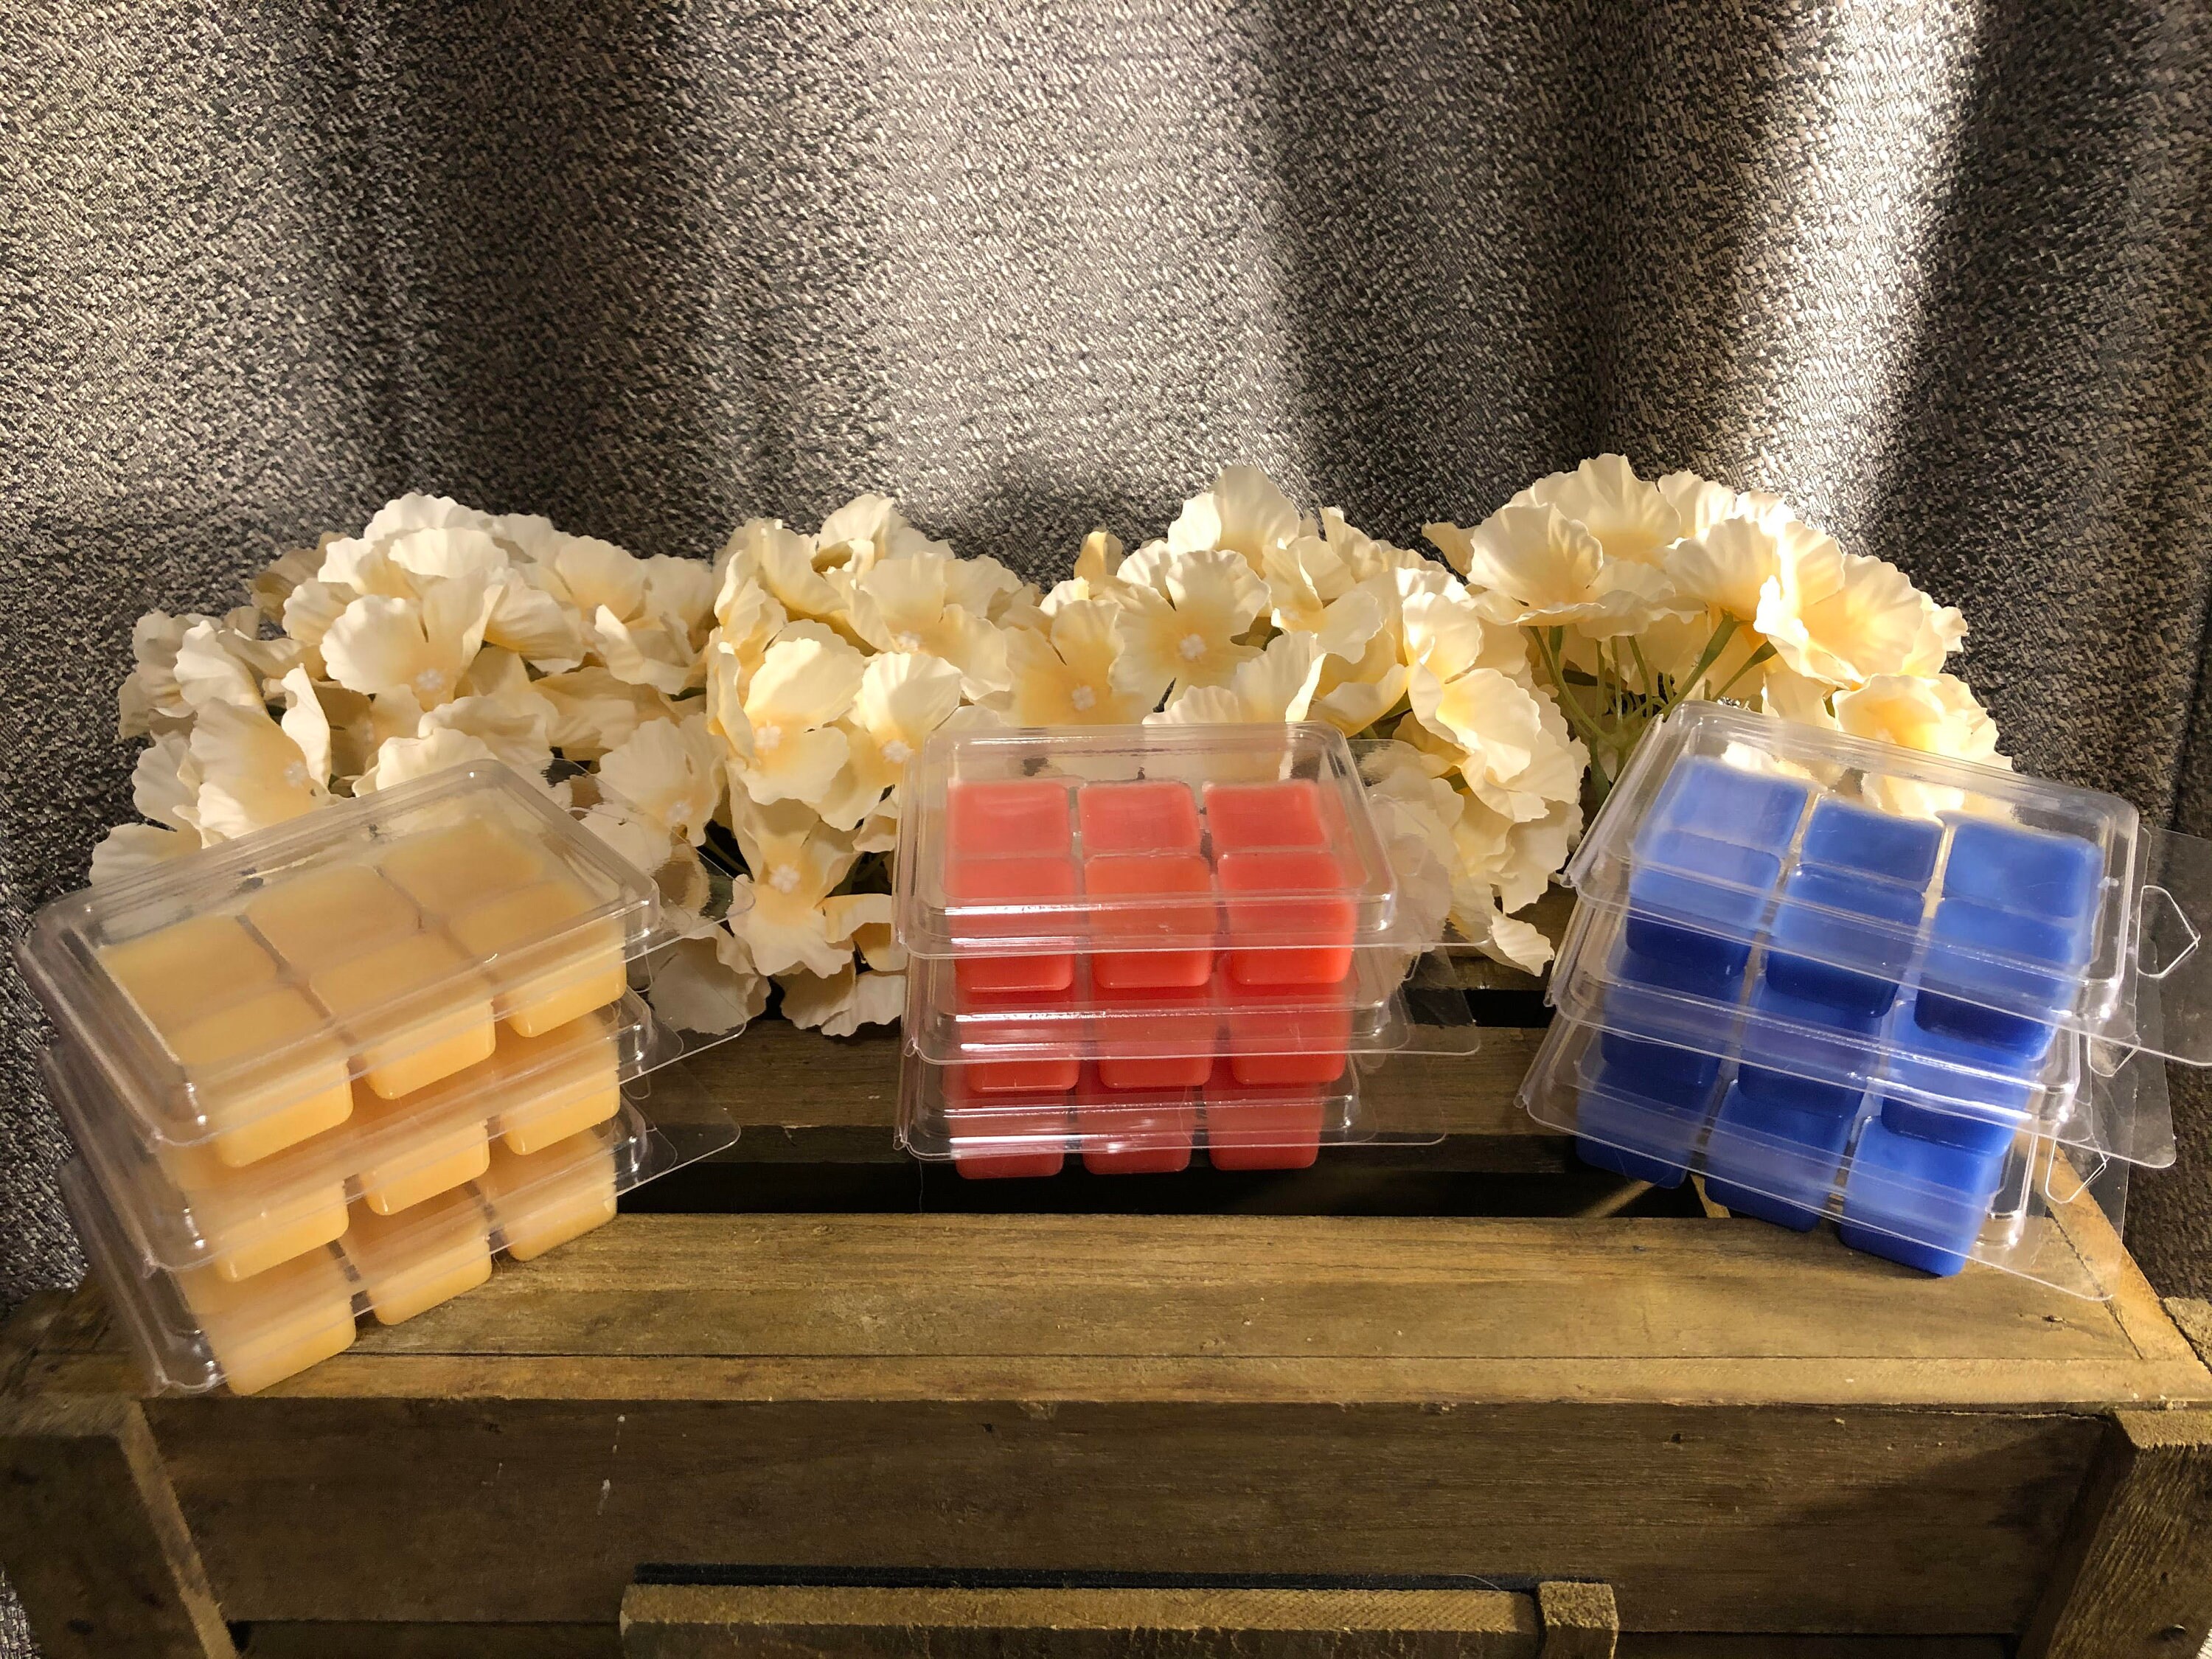 BUY 2, GET 1 FREE Choose Your Fragrance Scented Wax Cubes Soy Wax Melts  Free Shipping Quality Oils Warmers Toastedbunscandles 